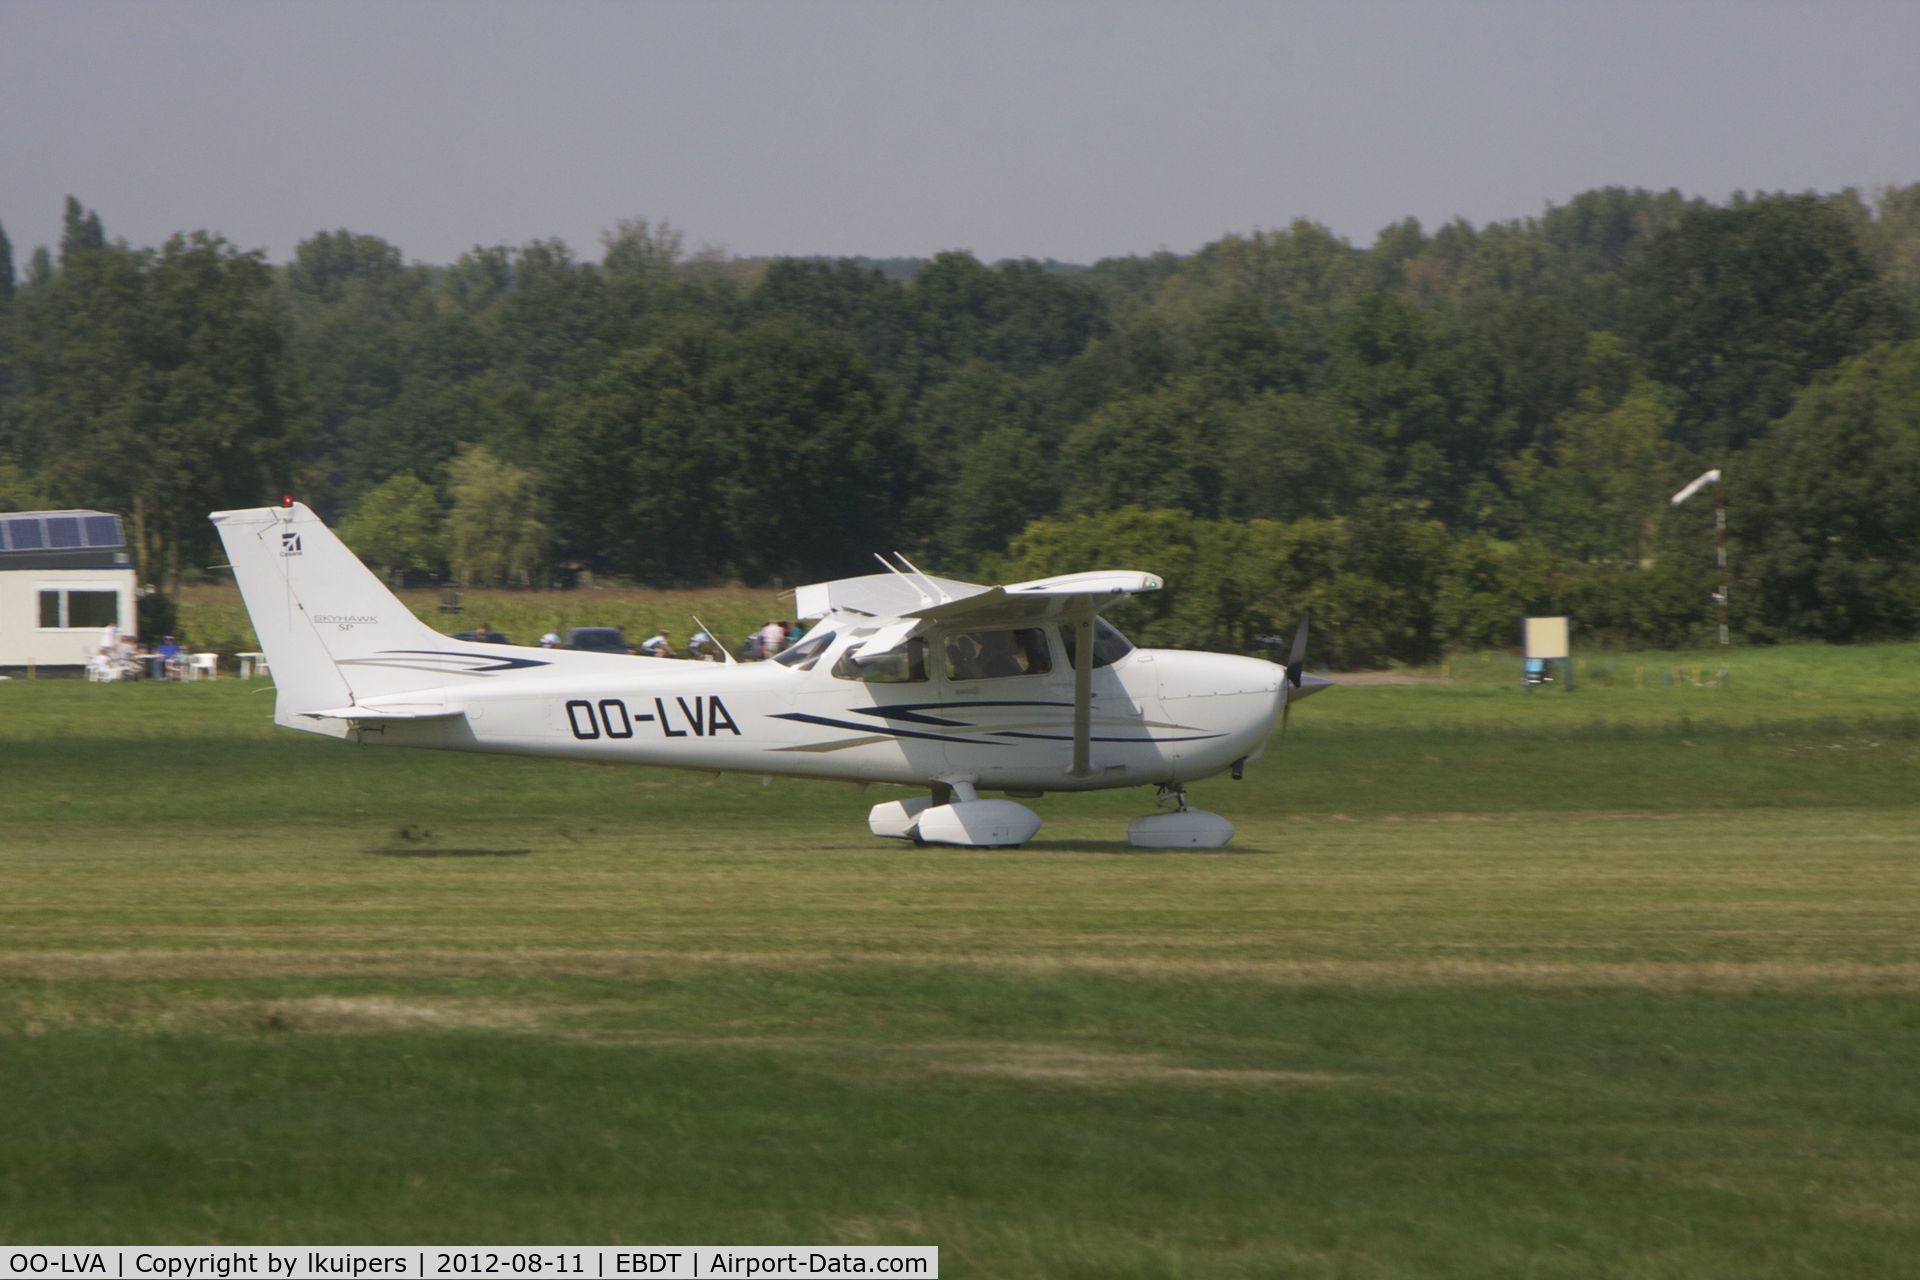 OO-LVA, 2007 Cessna 172S C/N 172S10533, Just arrived at the Oldtimer Fly-in at Schaffen Diest 2012